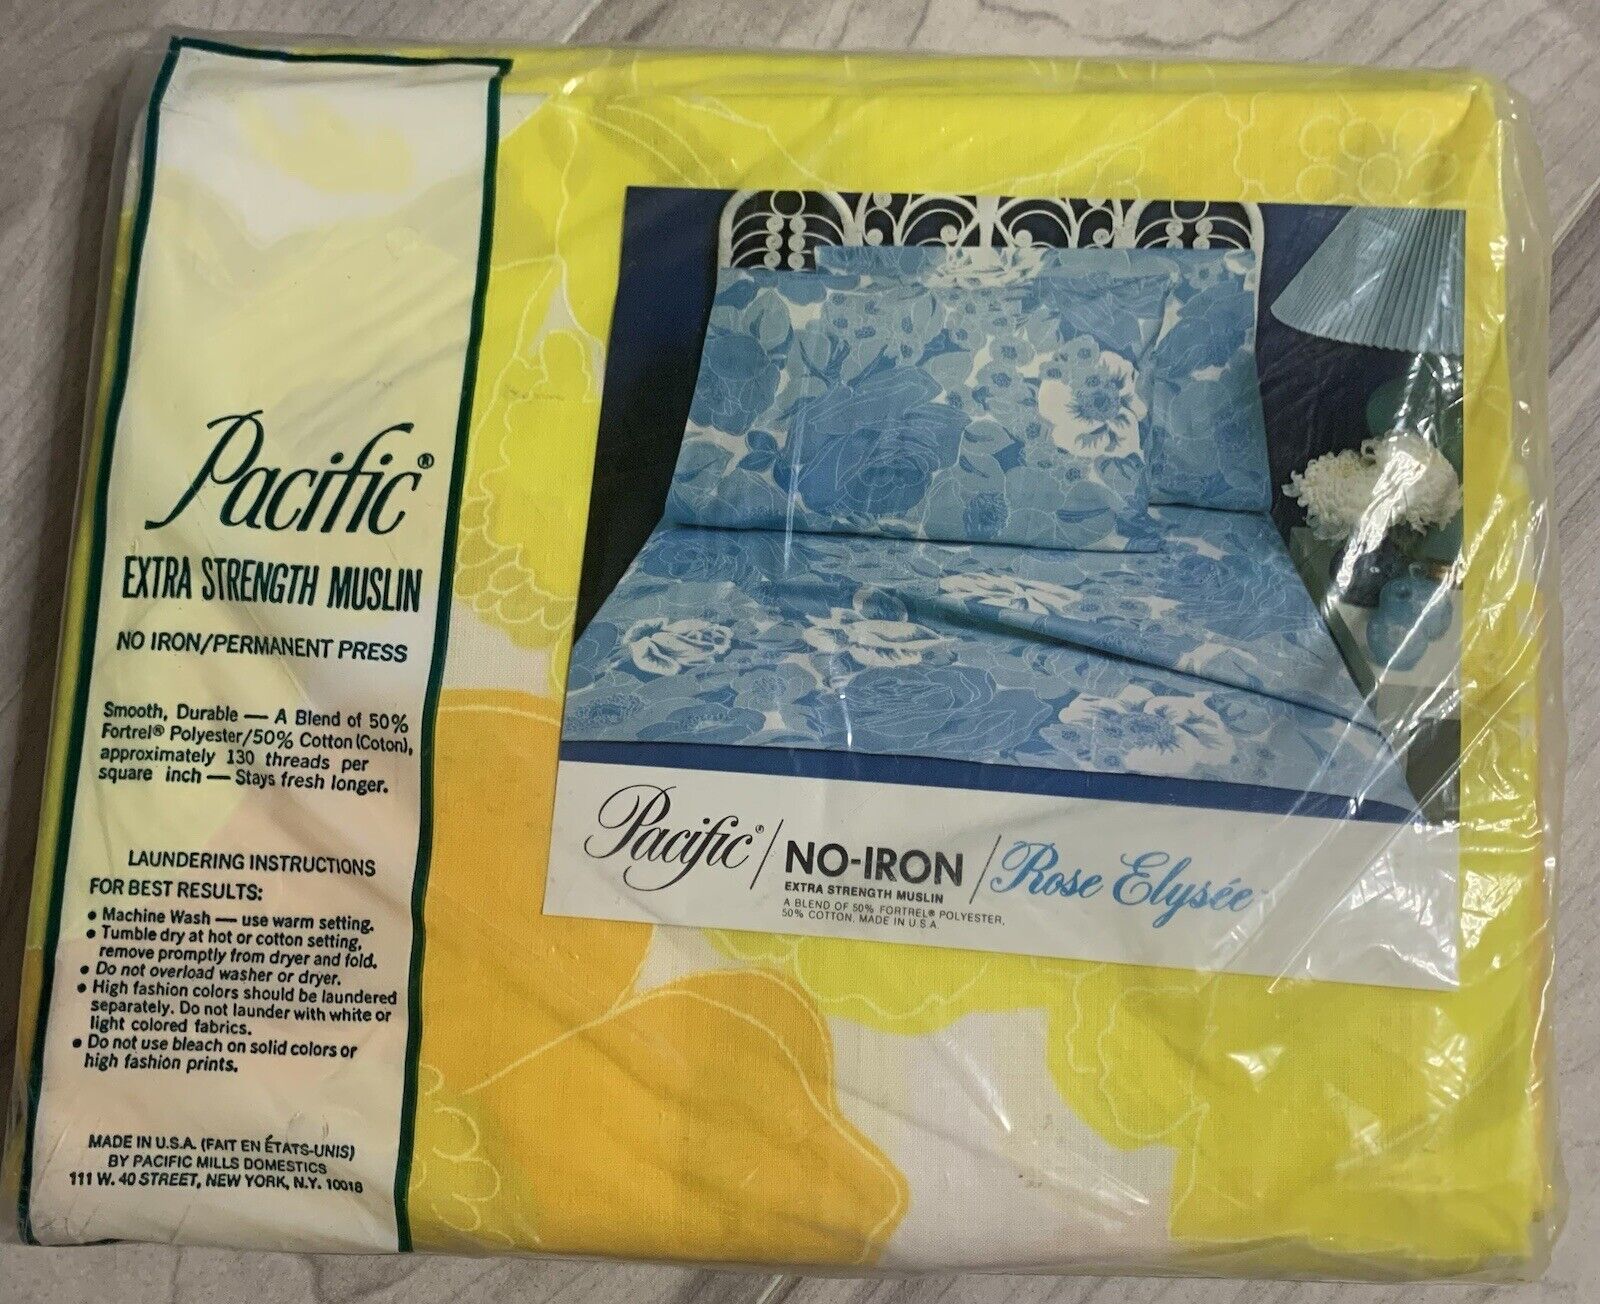 Vtg Pacific No-Iron Extra-Strength Muslin Twin Bed Flat Sheet Floral NEW Yellow